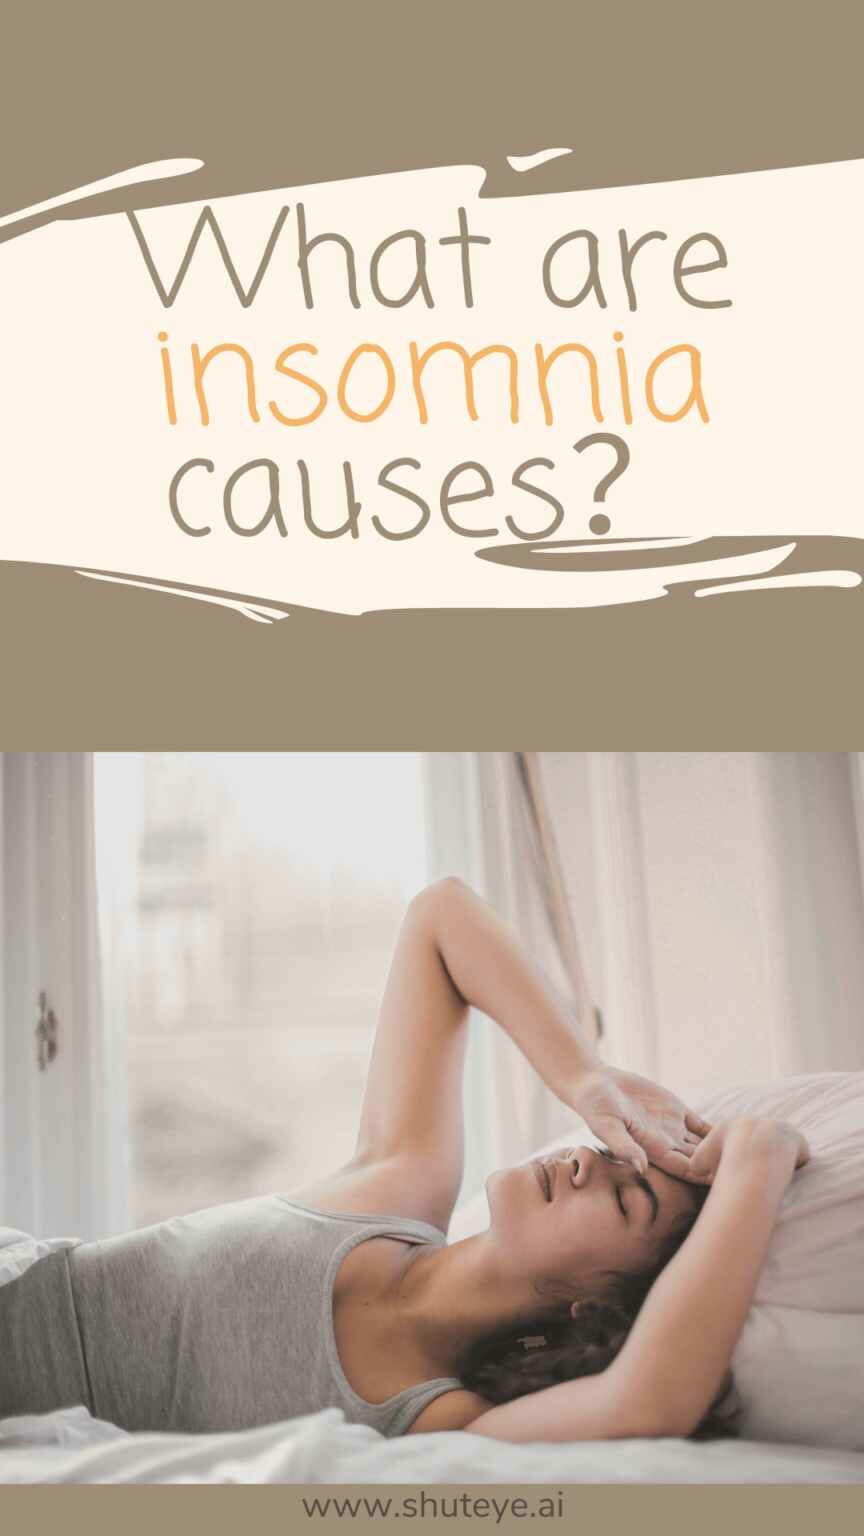 ShutEye insomnia causes and cures treatment